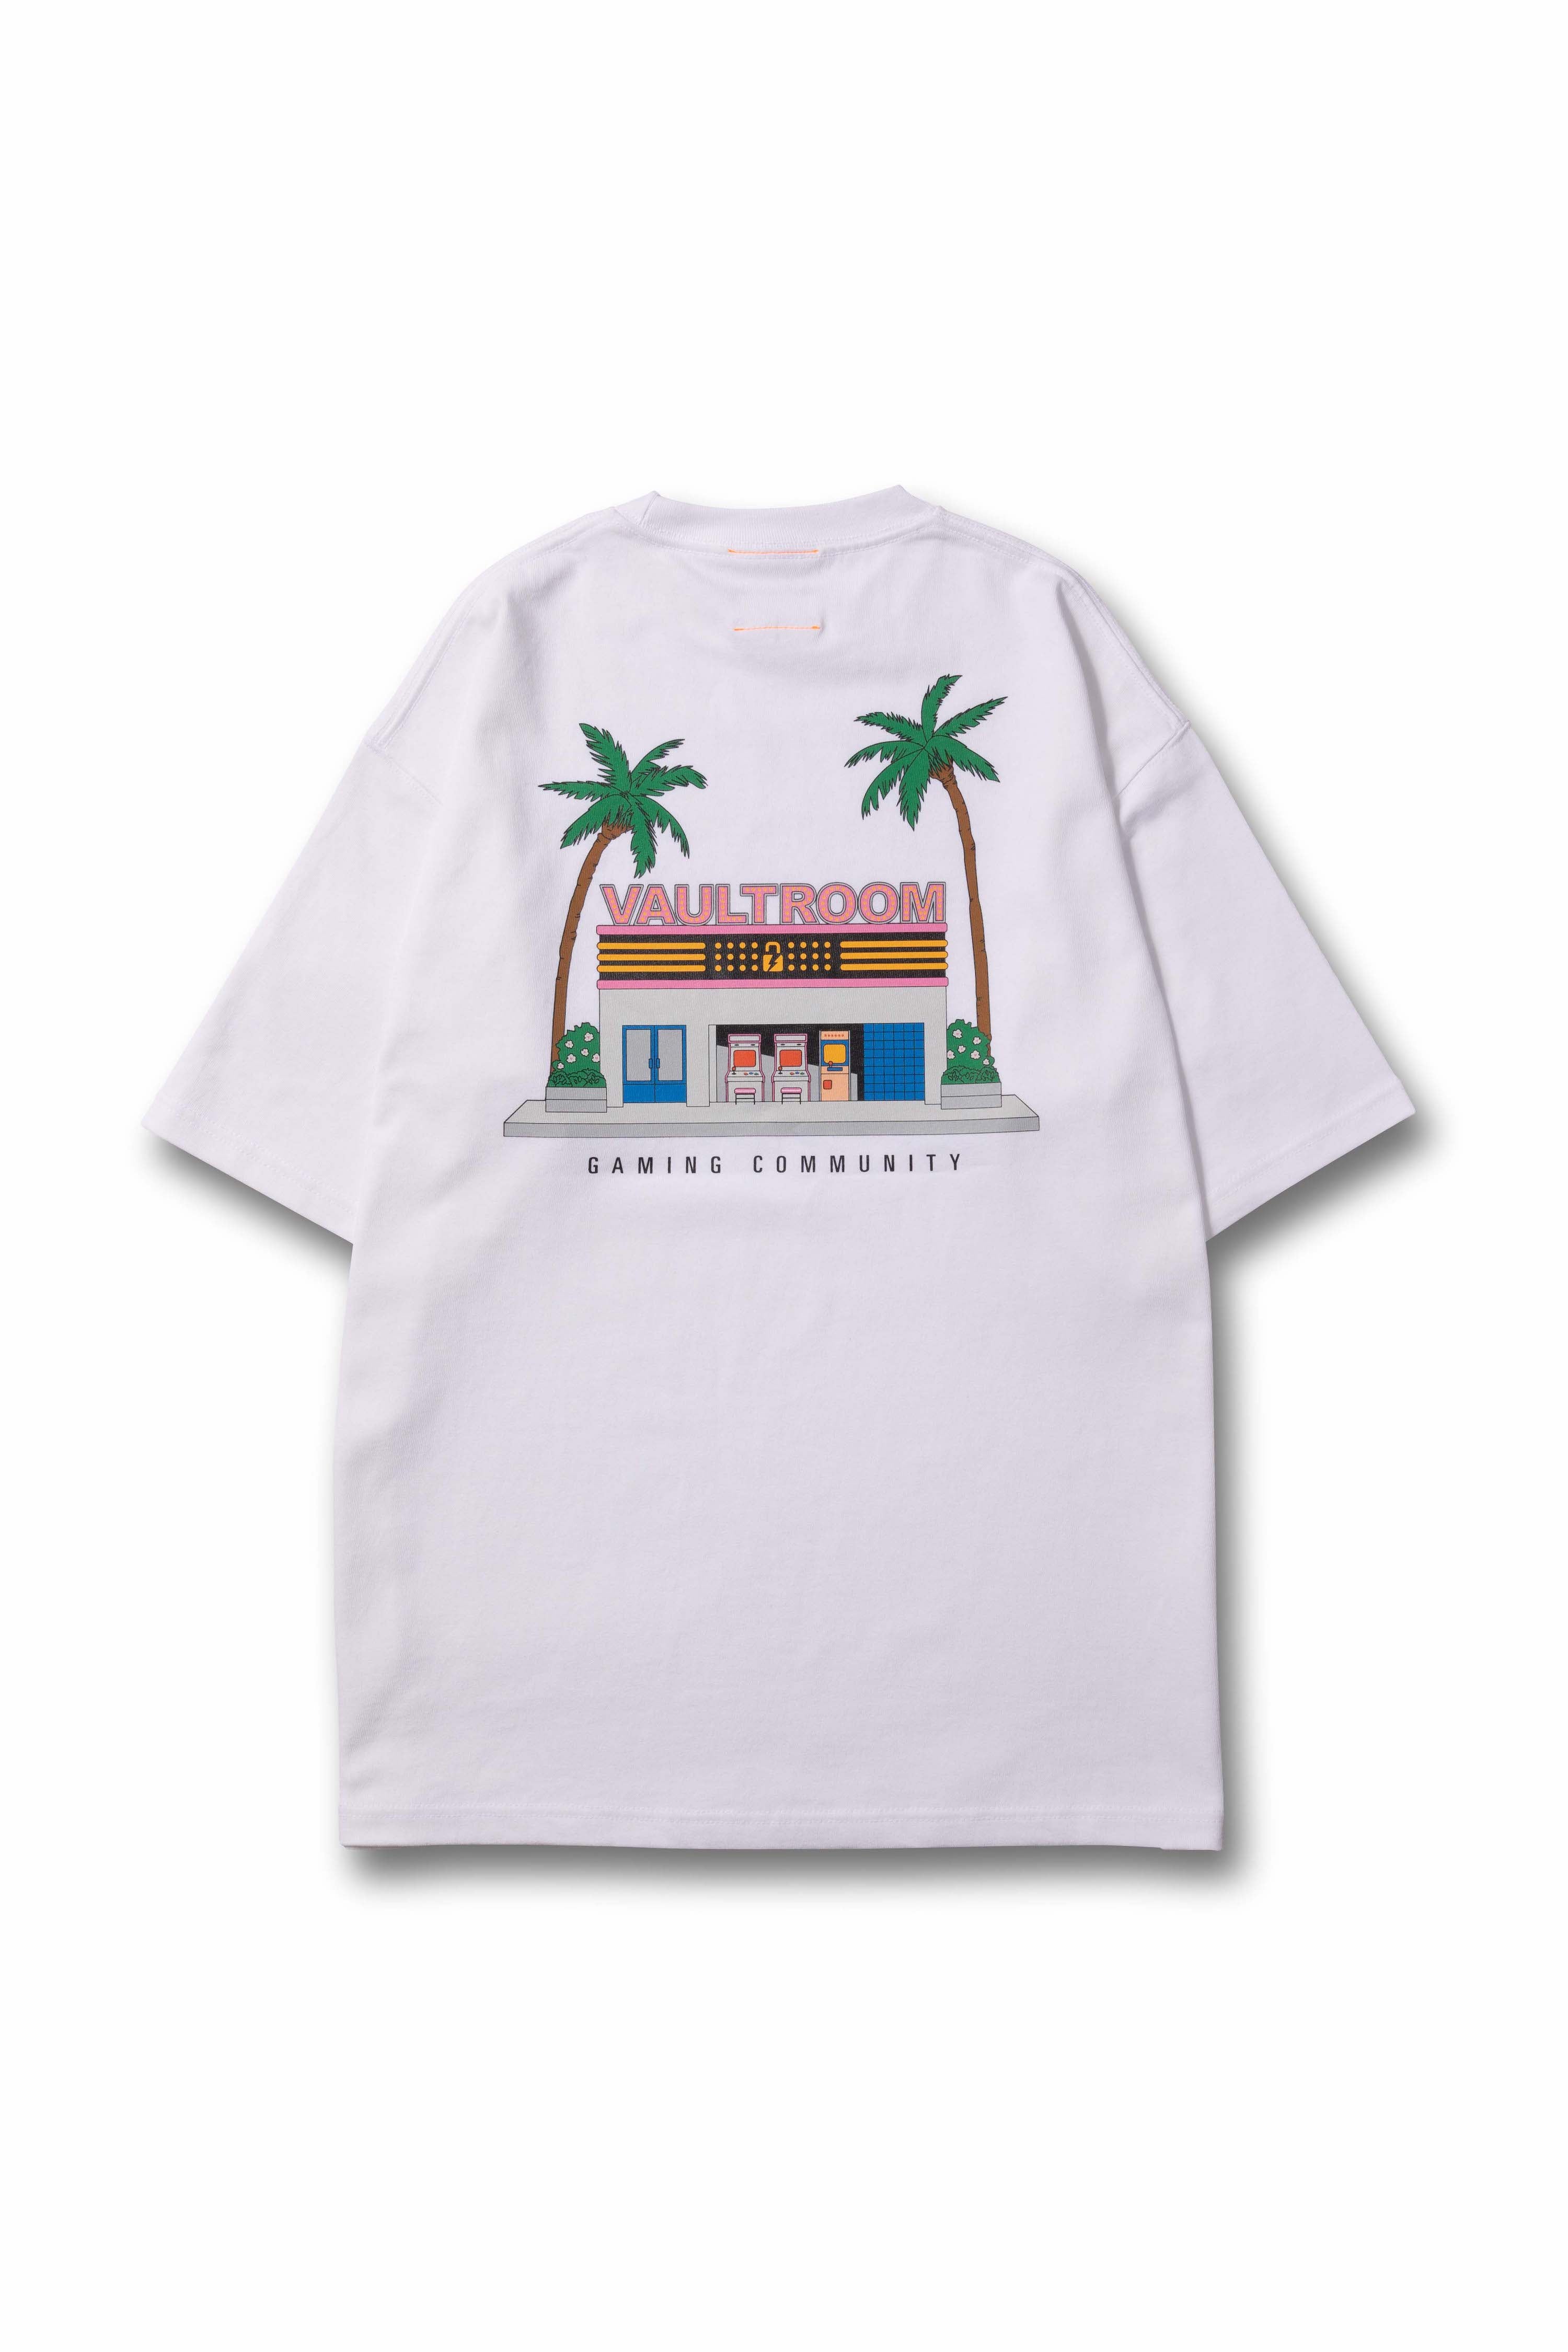 vaultroom GAME CENTER TEE / WHT | kensysgas.com